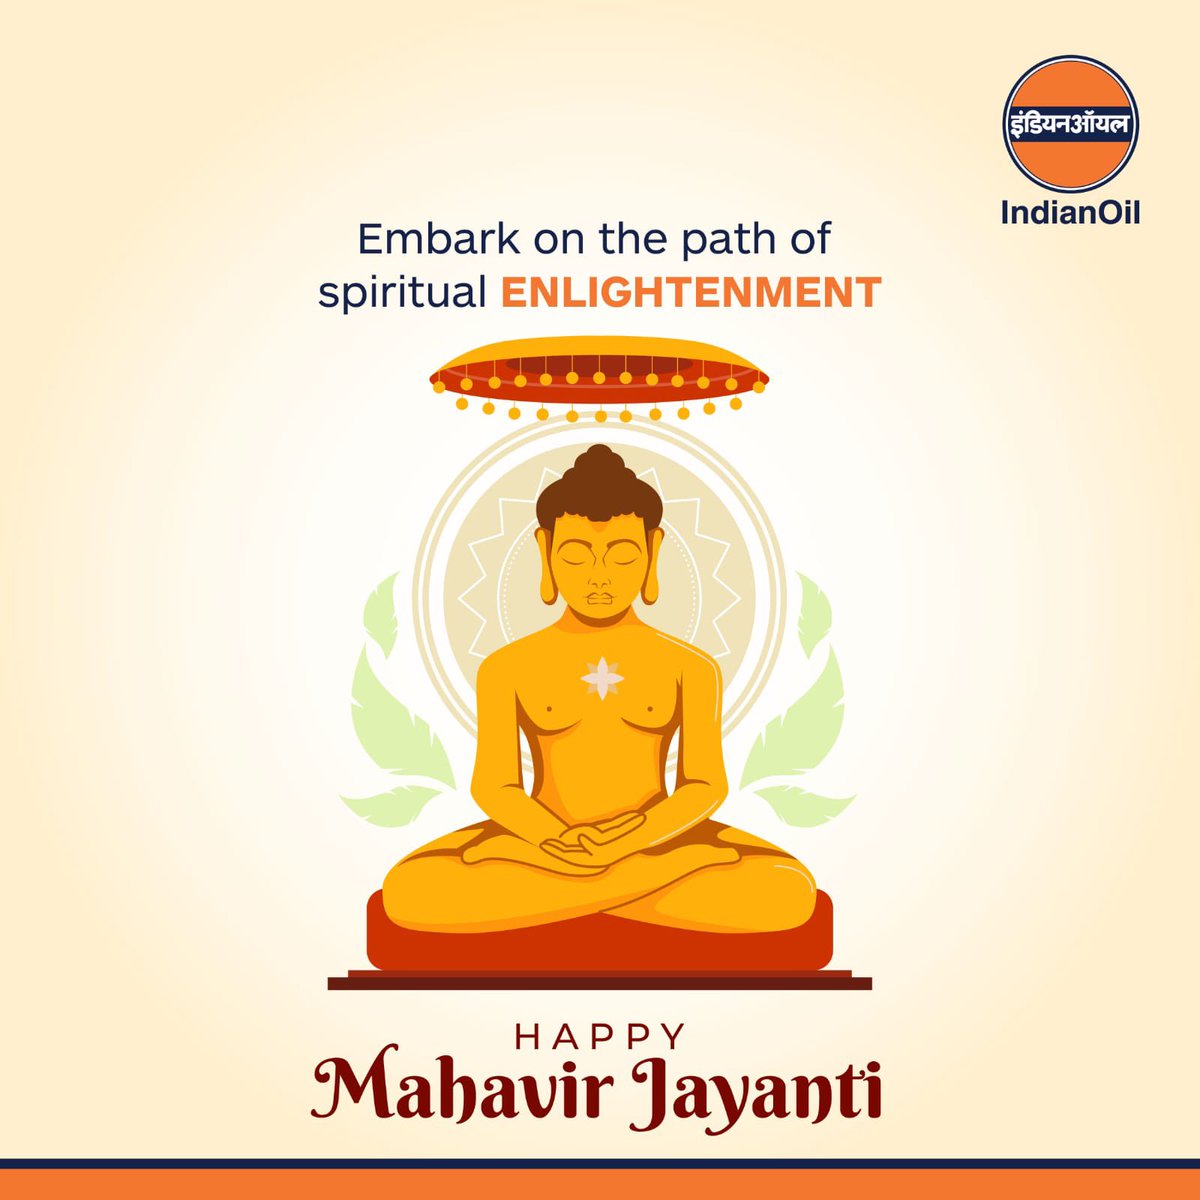 On this auspicious occasion of #MahavirJayanti, let us spread the words of Lord Mahavir and follow the path of humanity and non-violence. Wishing everyone a very happy Mahavir Jayanti !
#IndianOil #PhleIndianPhirOil